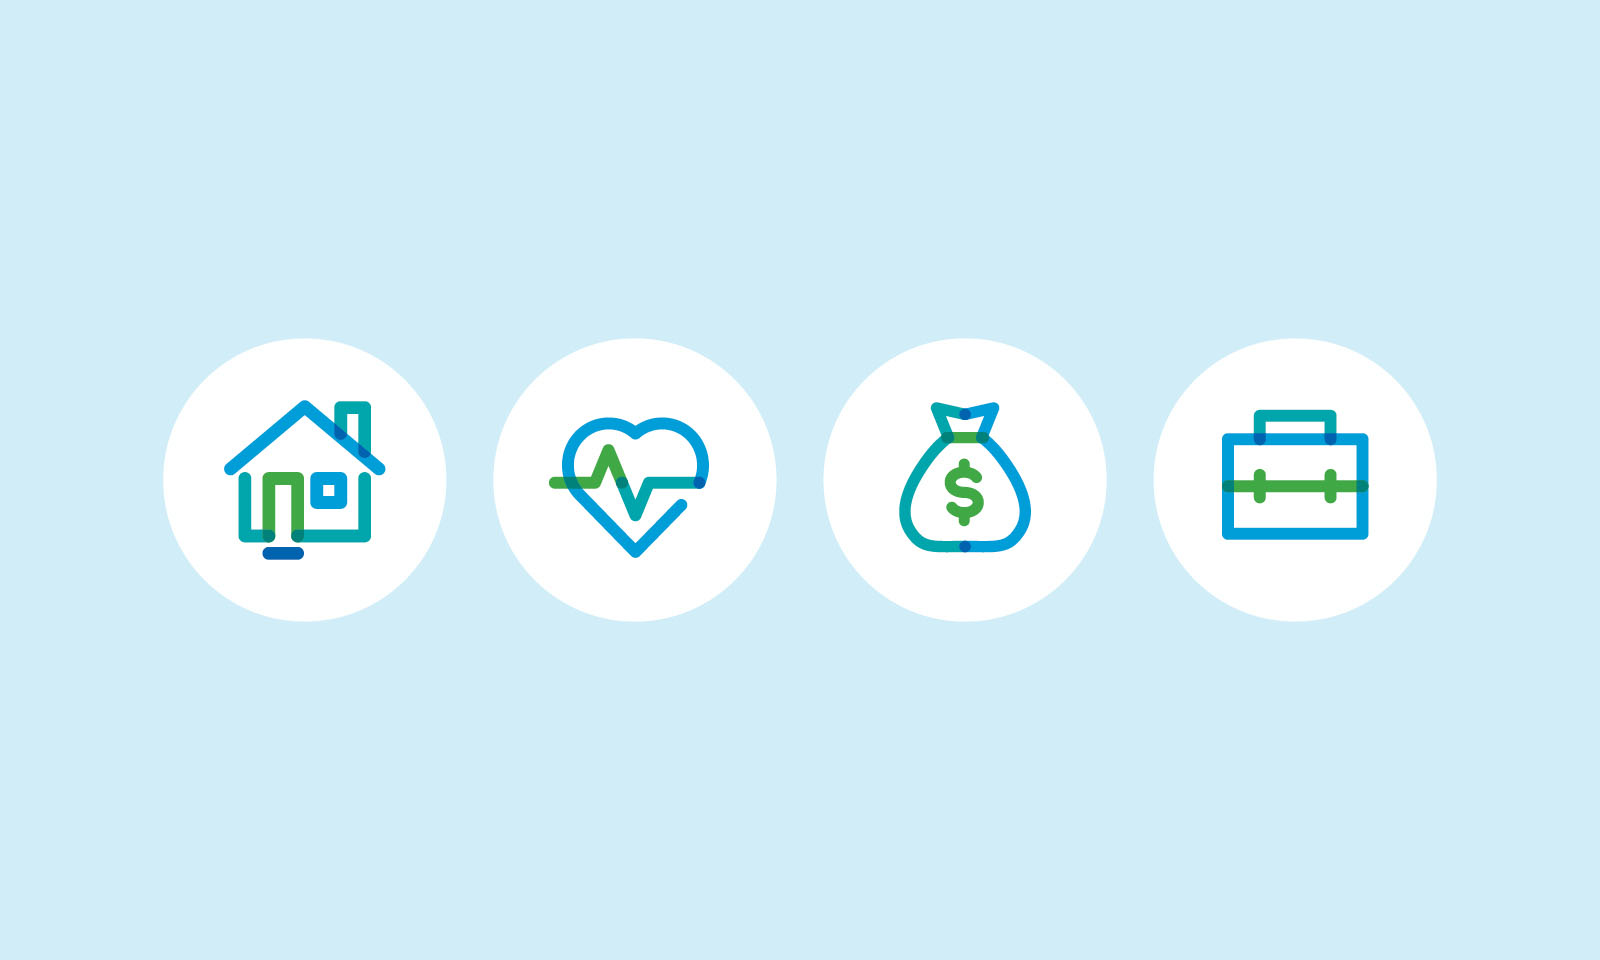 House, heartbeat, money sack and briefcase icons.